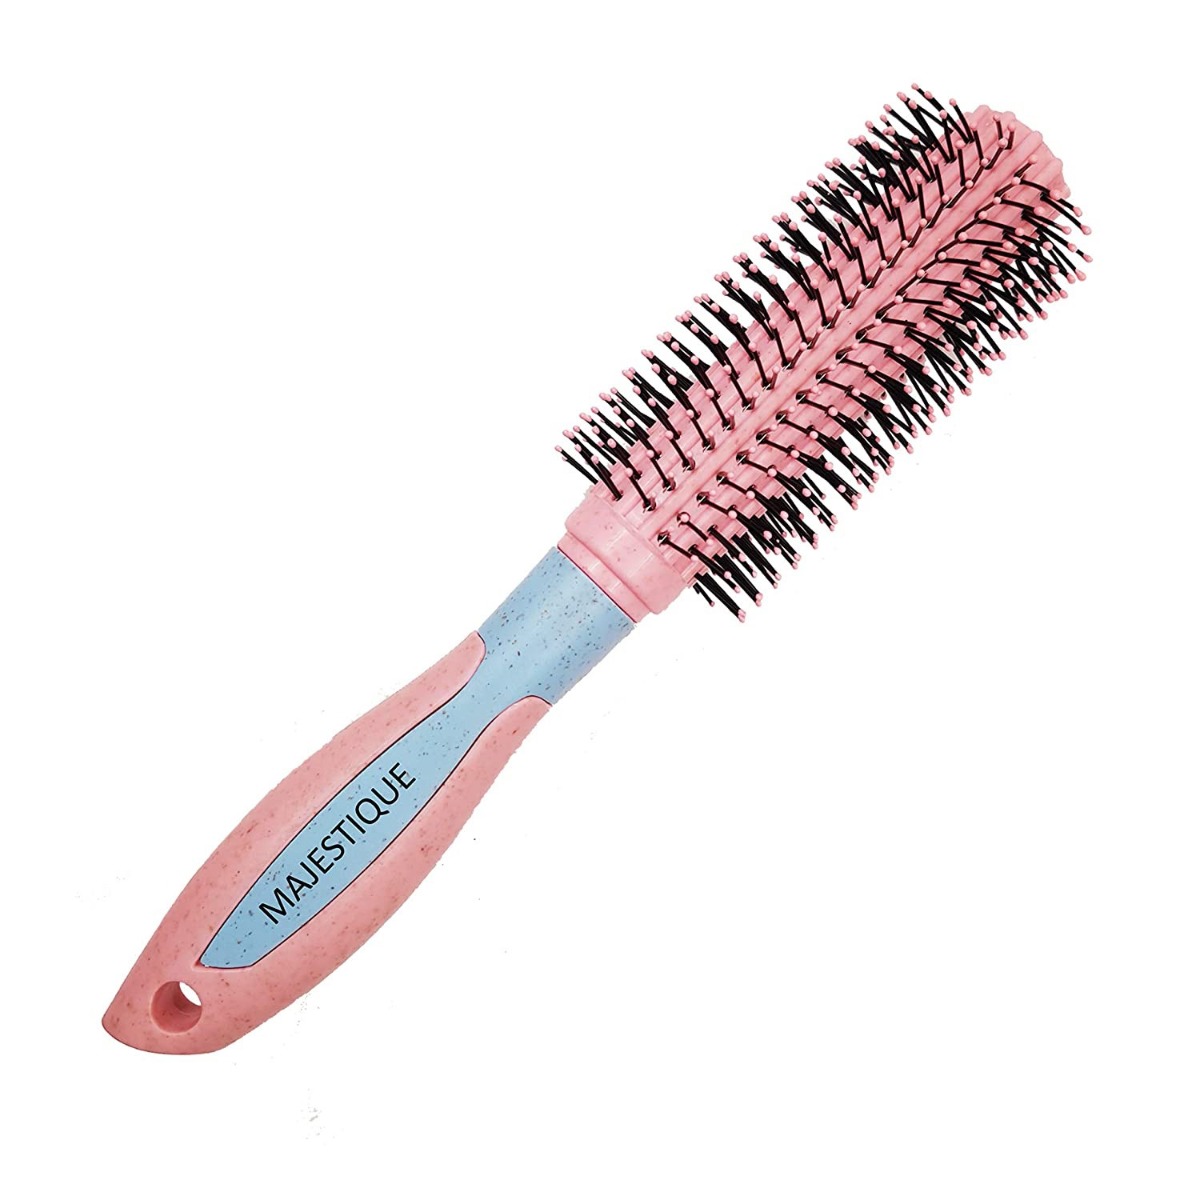 Majestique Roller Hair Brush For Blow Drying & Hair Styling, 1Pc